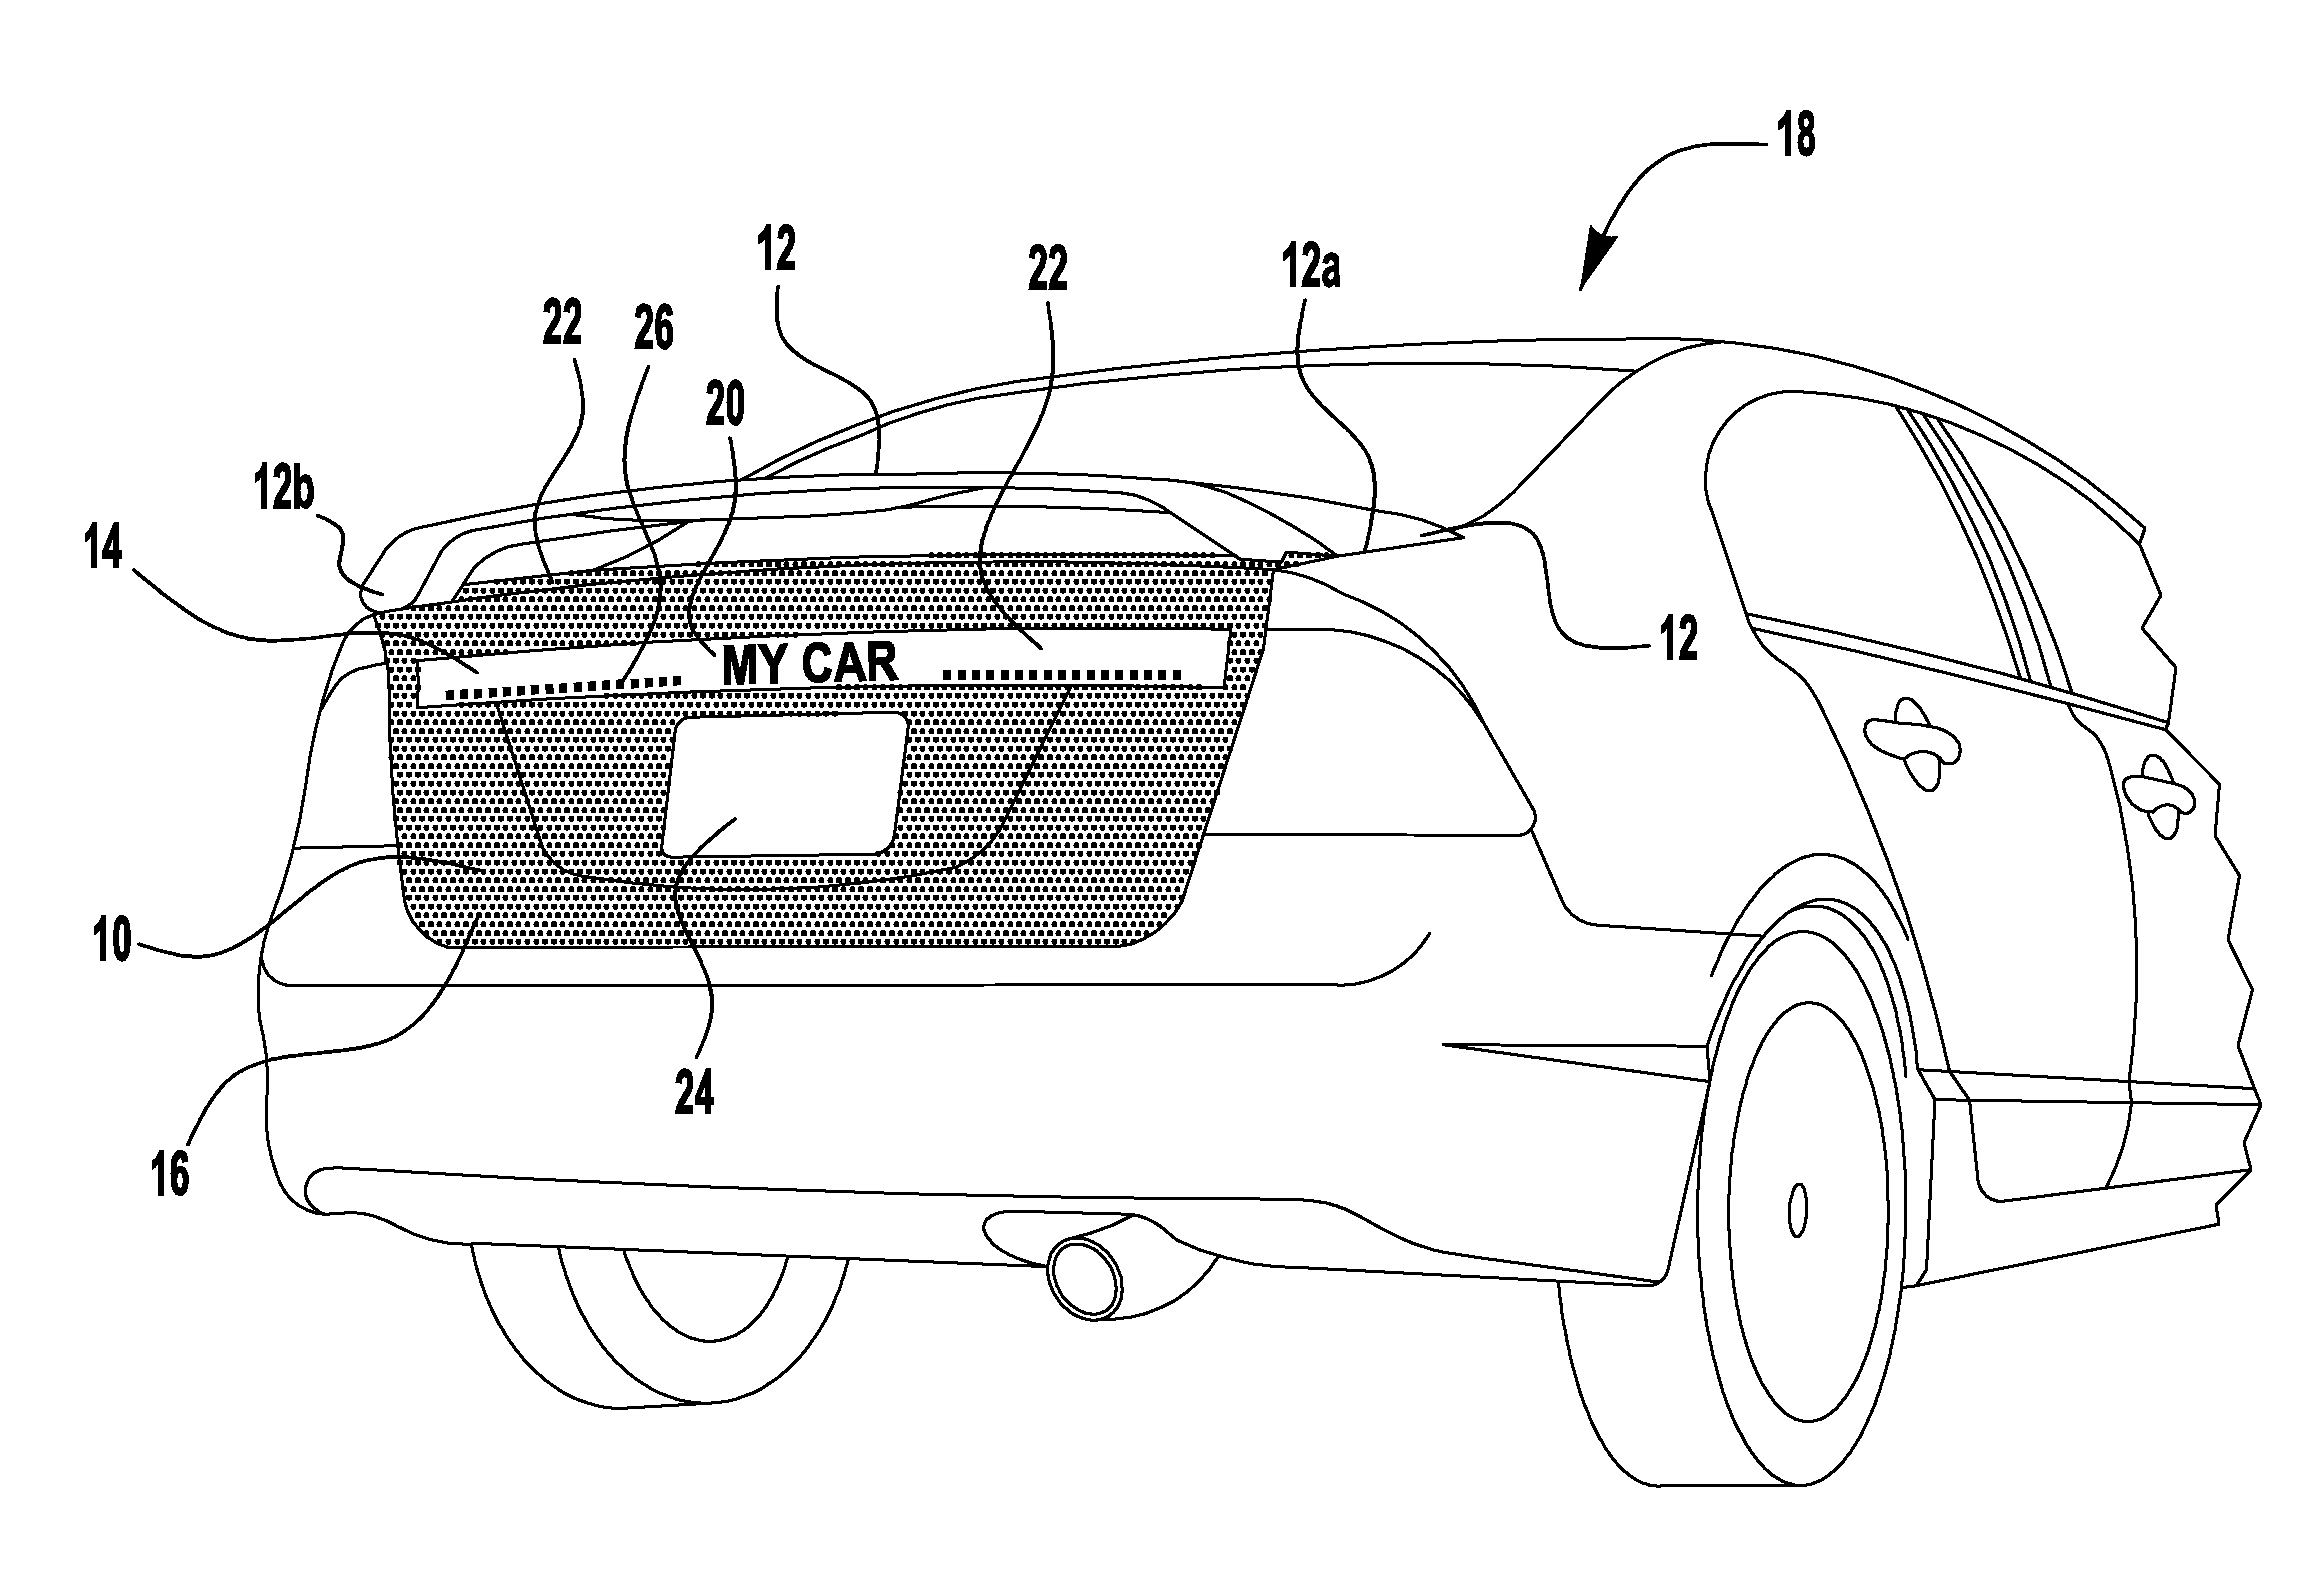 Combination trunk cover with spoiler and scrolling display